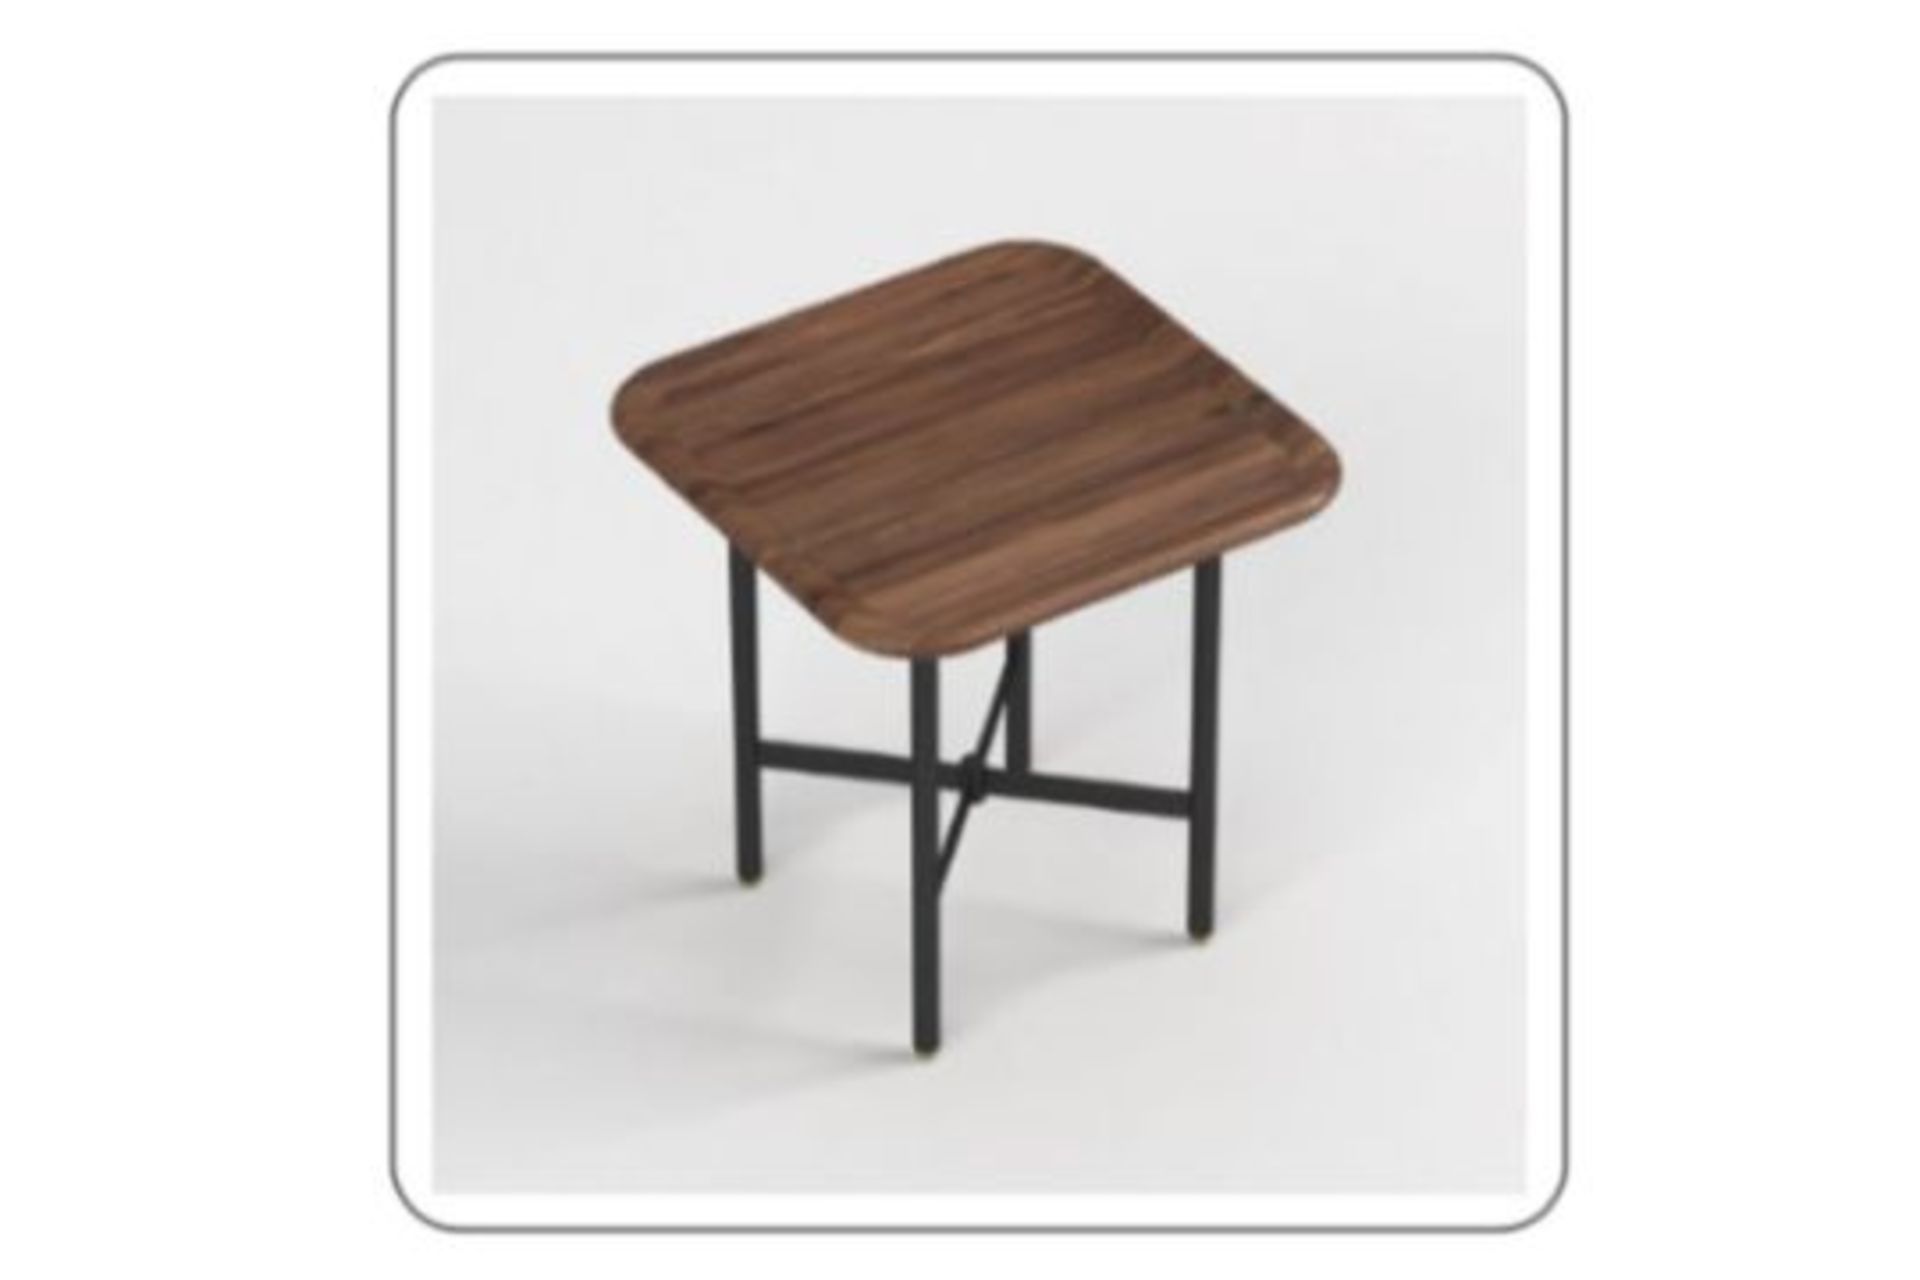 Contemporary Walnut Side Table With A Focus On Minimalist Design And Natural Material Marries